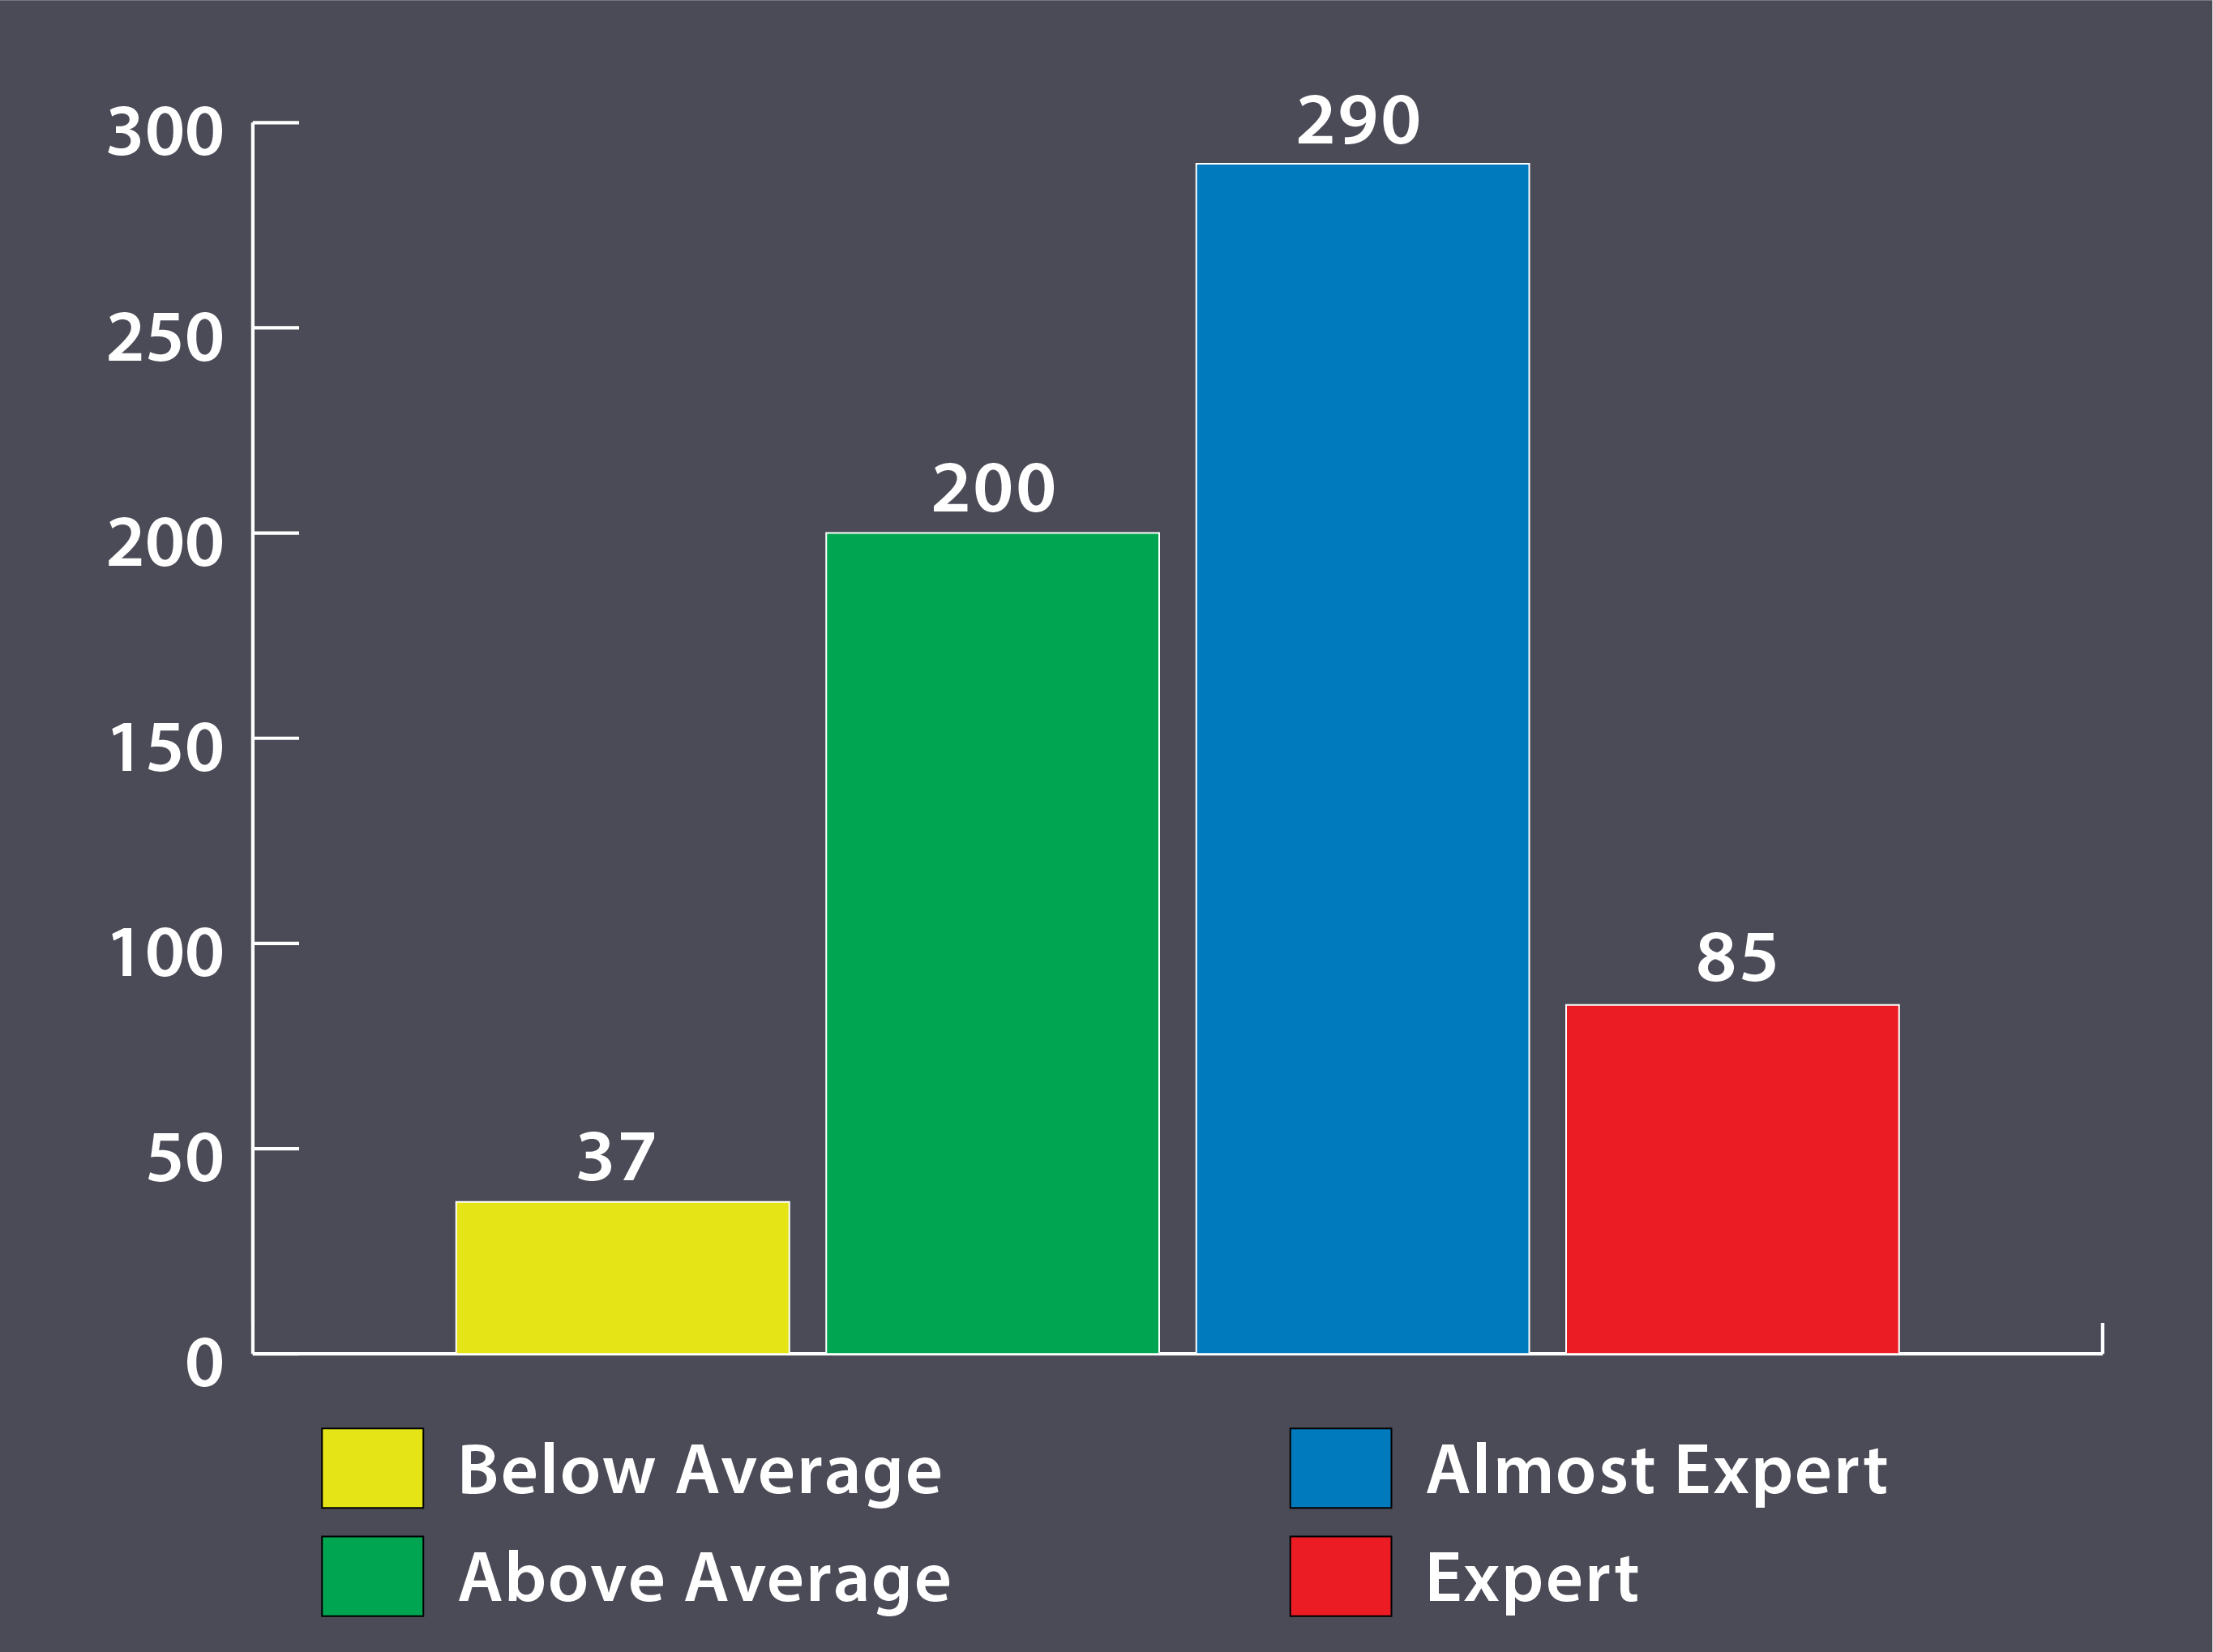 Participants self identified level of expertise using a computer